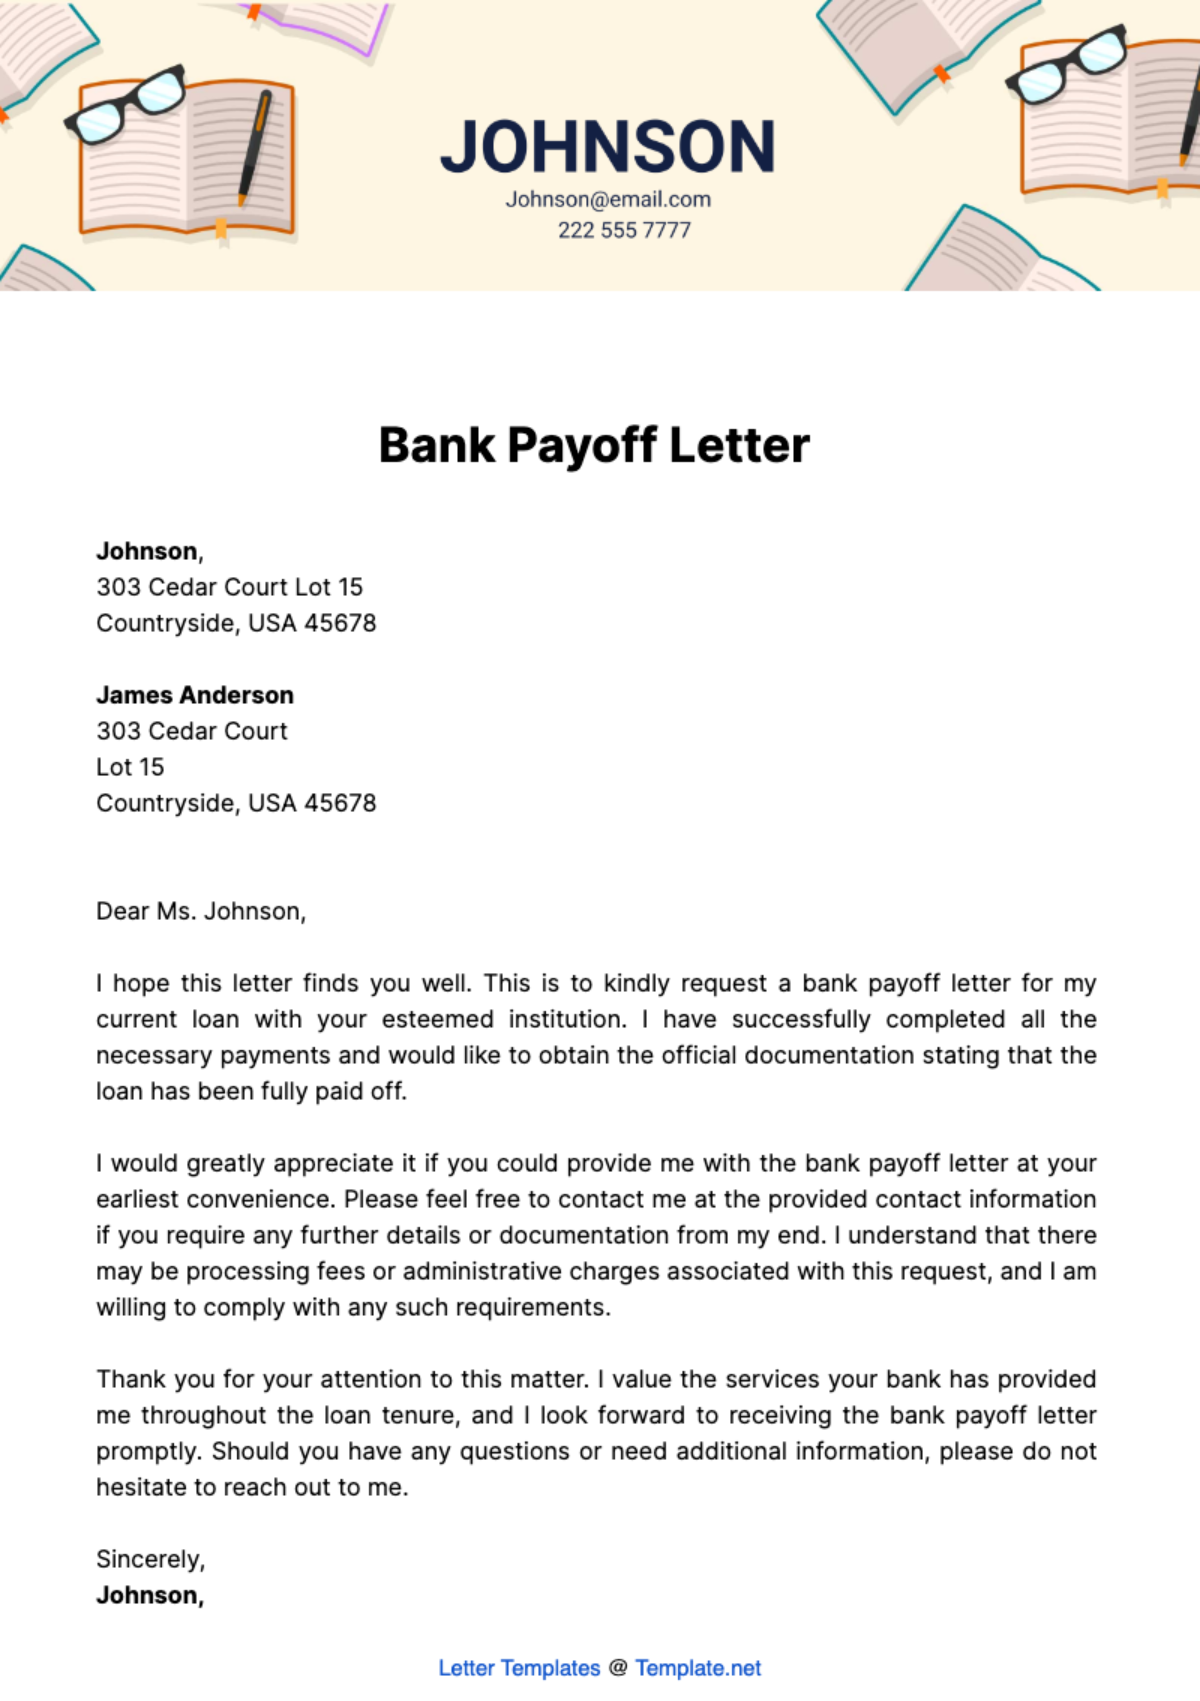 Bank Payoff Letter Template